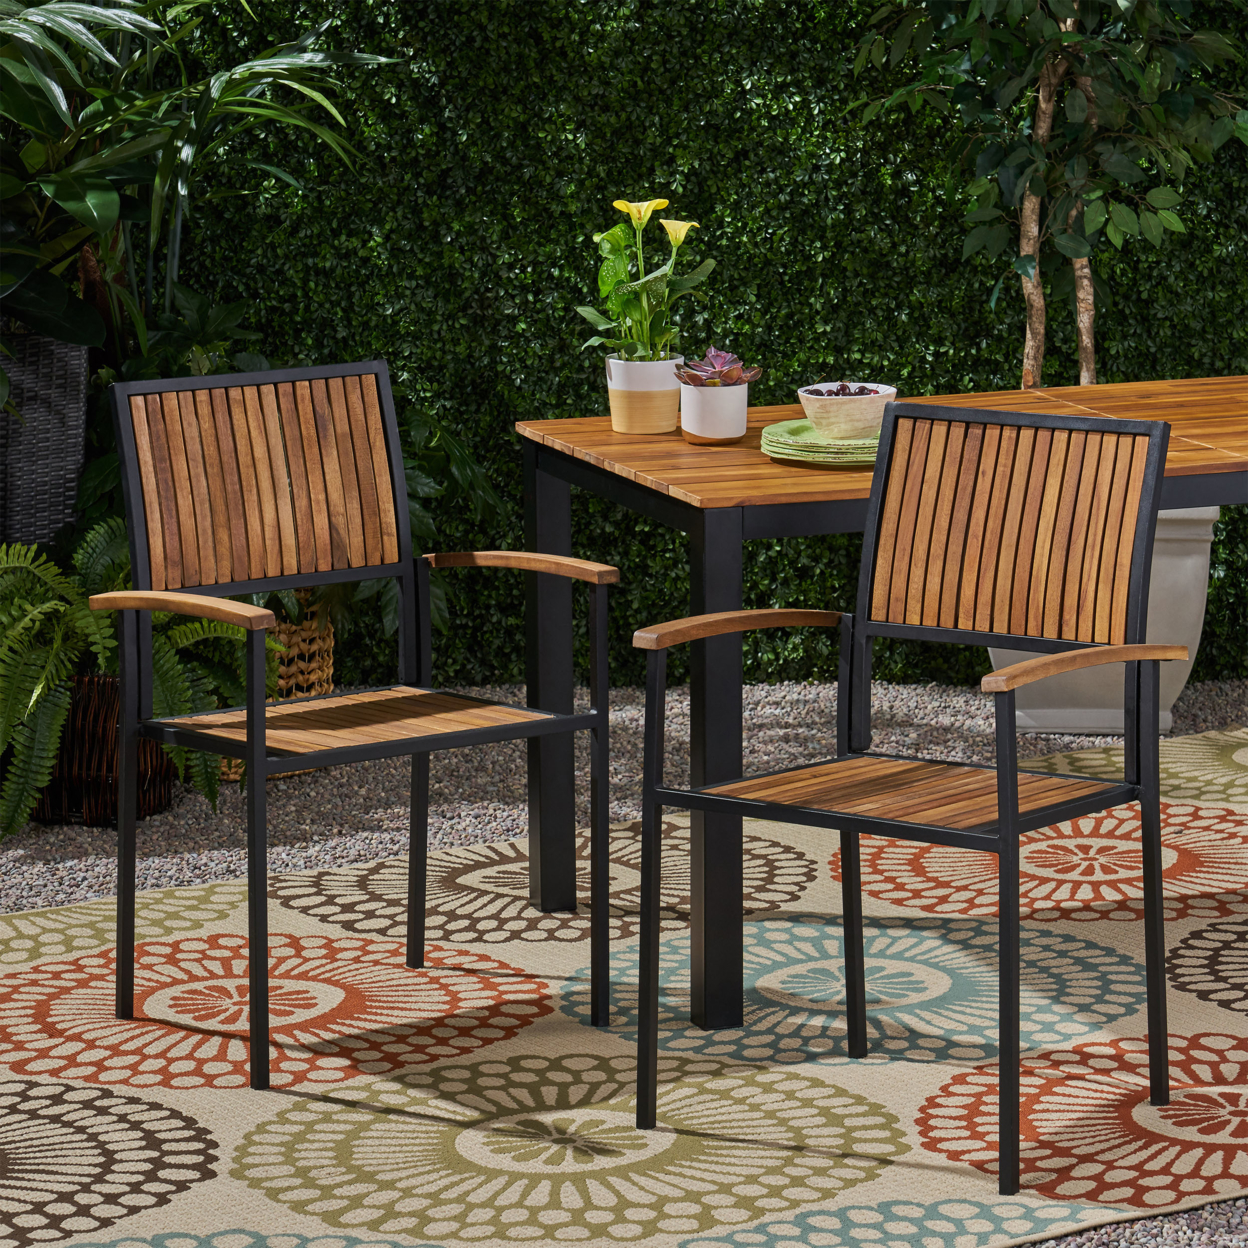 Owen Outdoor Wood And Iron Dining Chair (Set Of 2) - Teak Finish + Black Finish